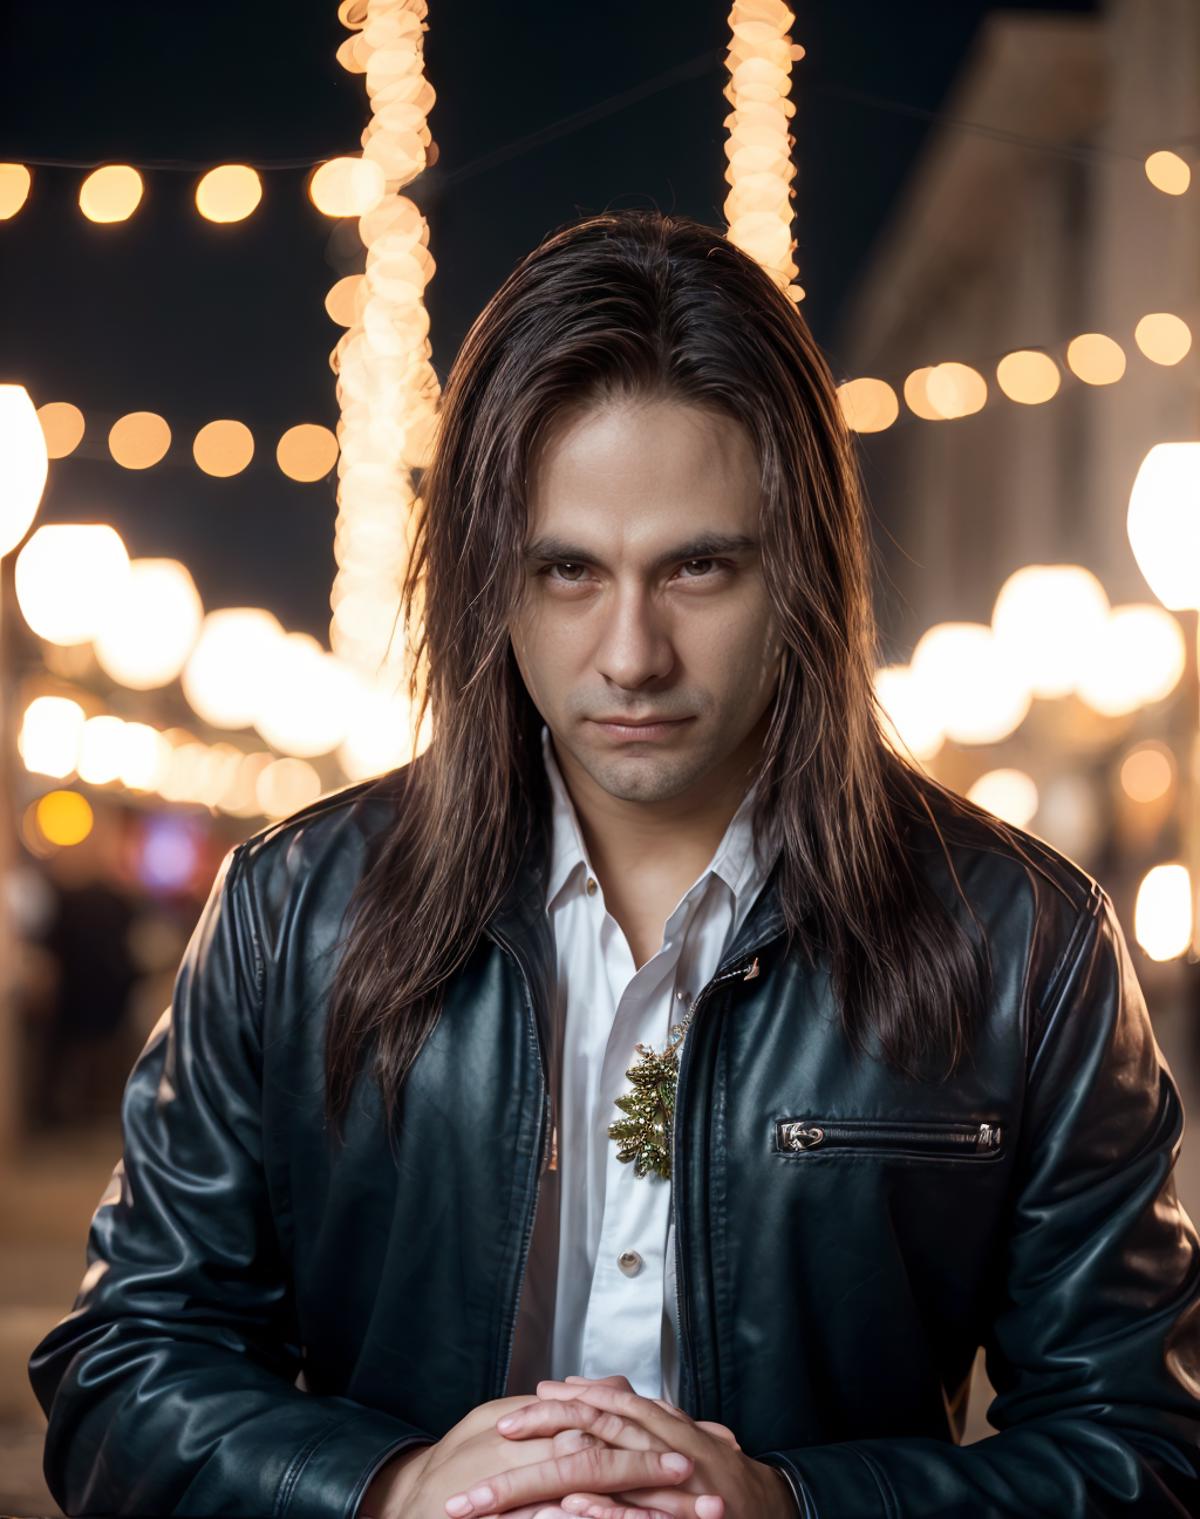 Andre Matos singer LORA👑 image by Quiron